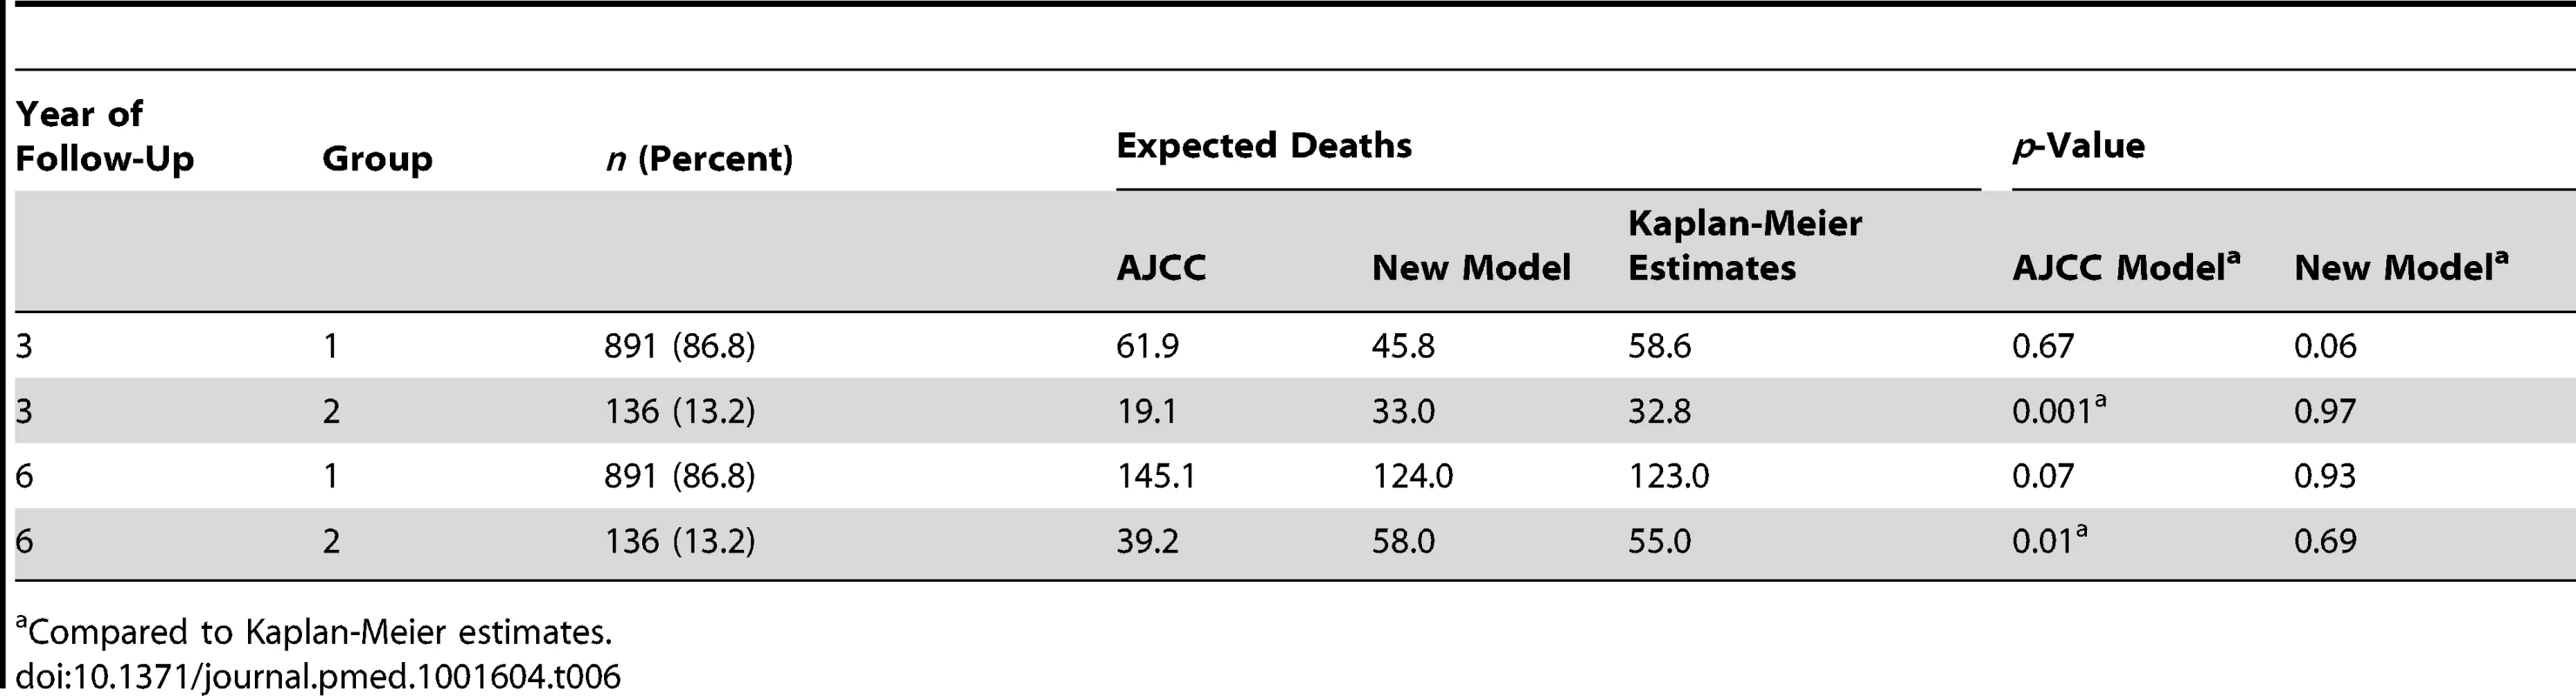 Kaplan-Meier estimates versus predicted deaths for a follow-up of 3 and 6 y by model and group.